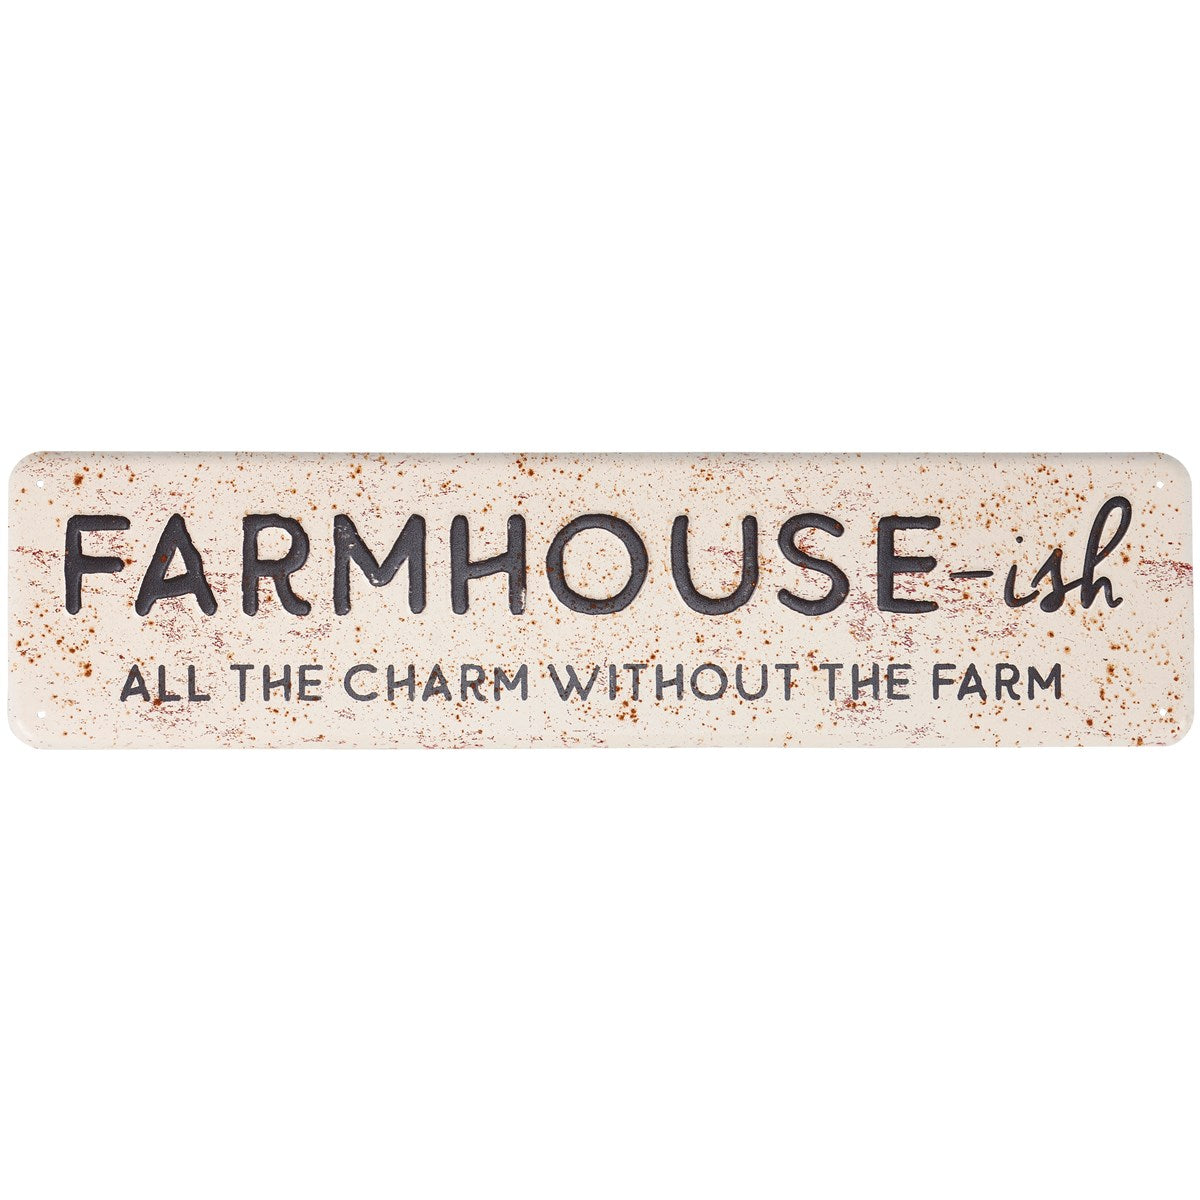 Farmhouse-ish All the Charm Without the Farm 20" Metal Wall Sign